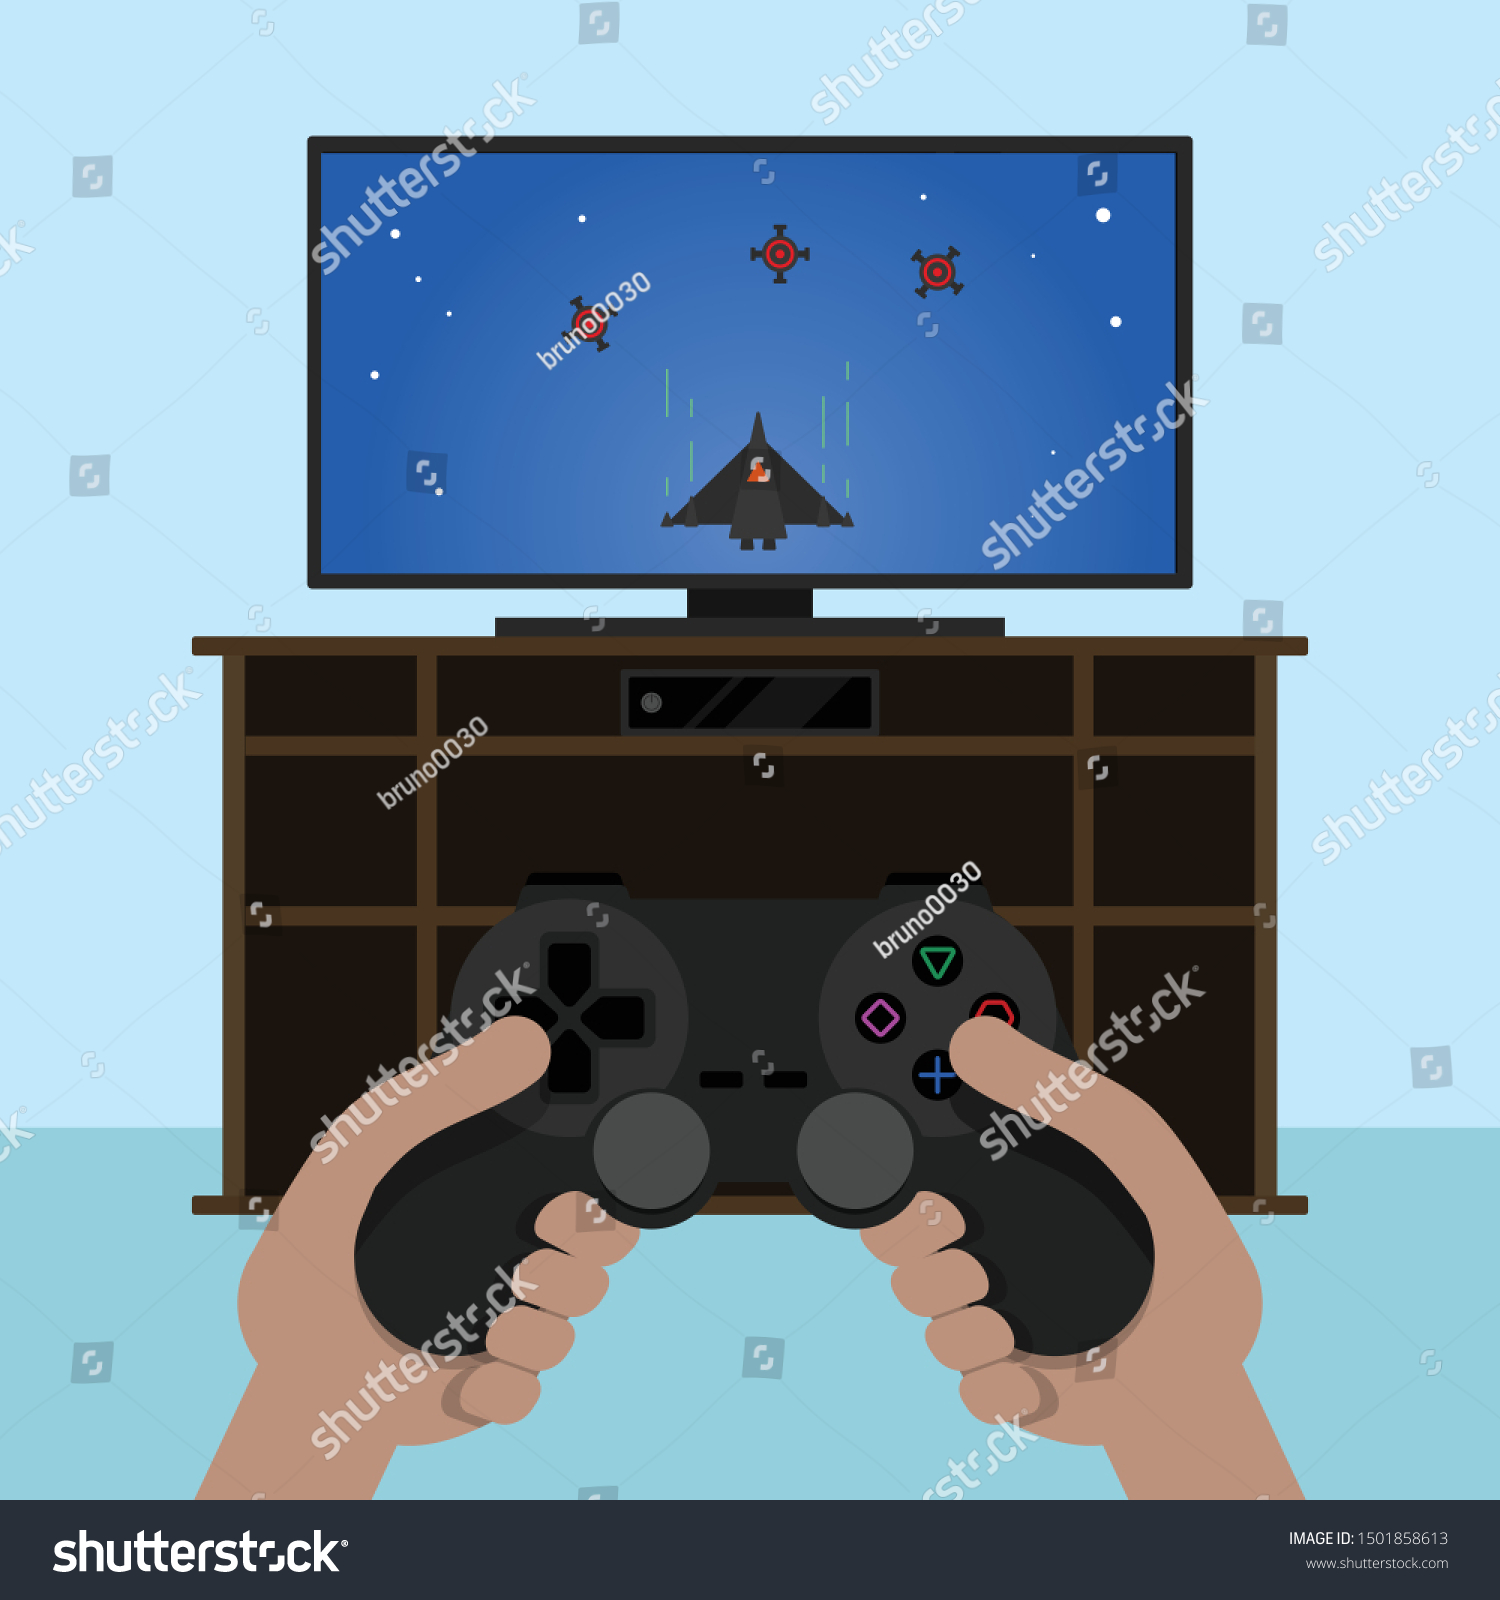 Person Playing Spaceship Video Game On Royalty Free Stock Image